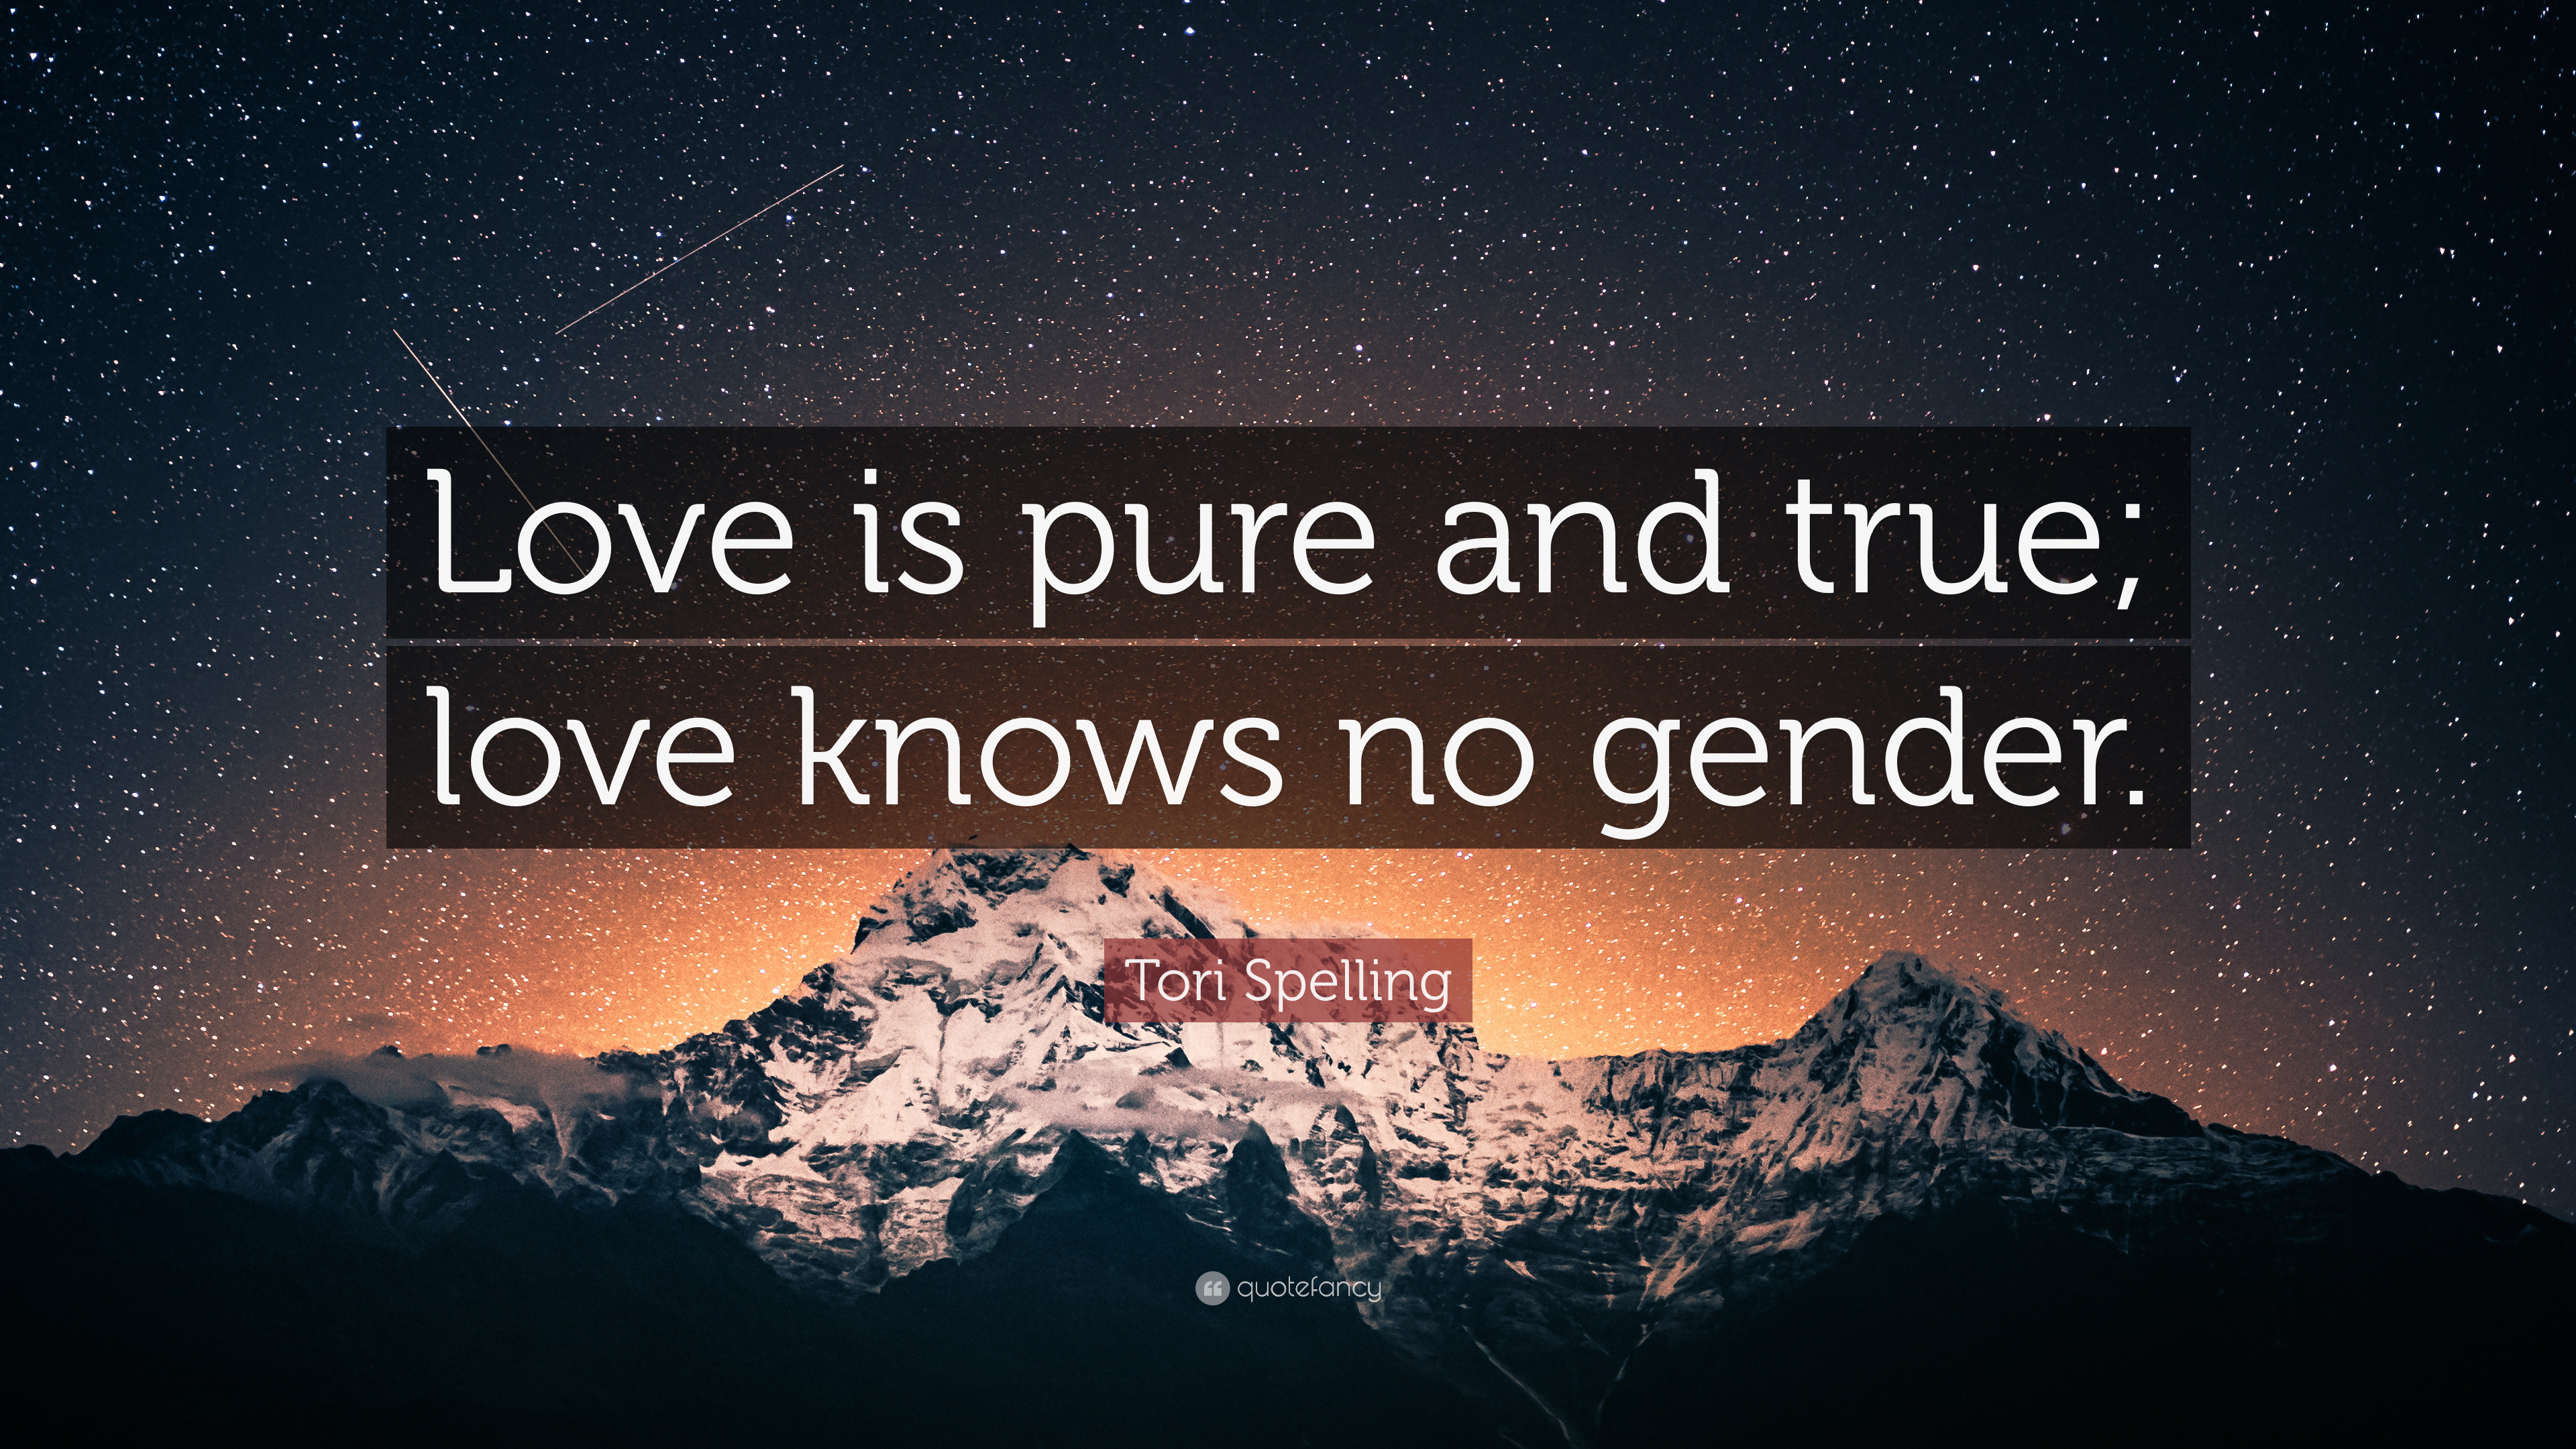 3840x2160 Tori Spelling Quote: “Love is pure and true; love knows no gender.